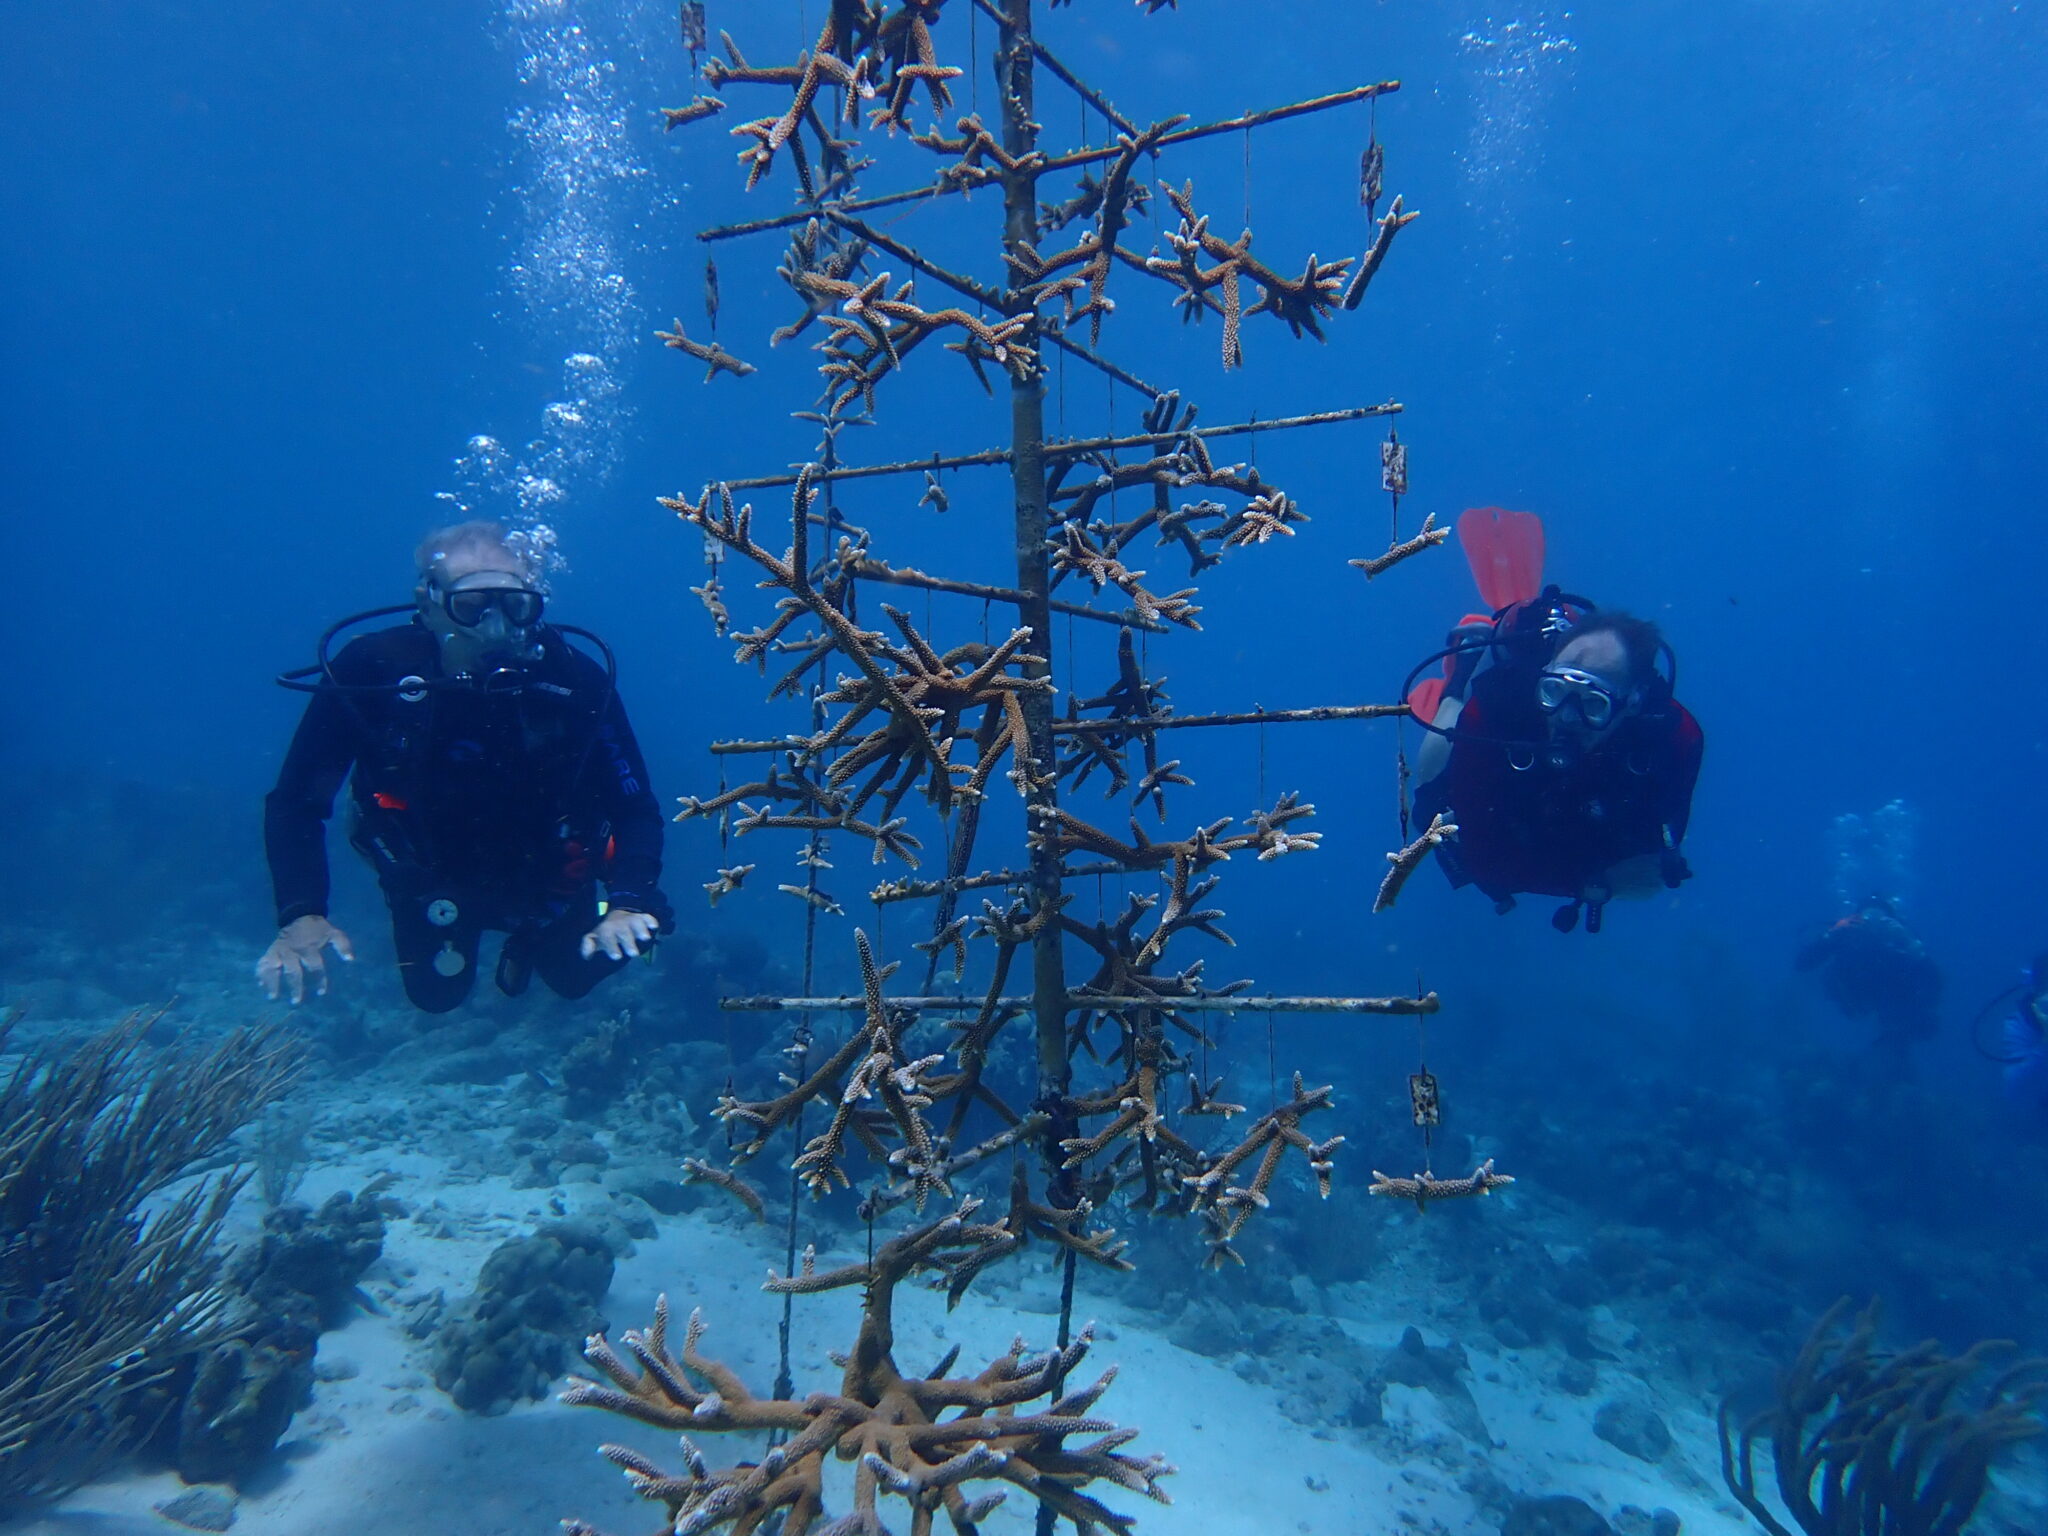 A large branching metal structure holding new coral growth underwater with two divers